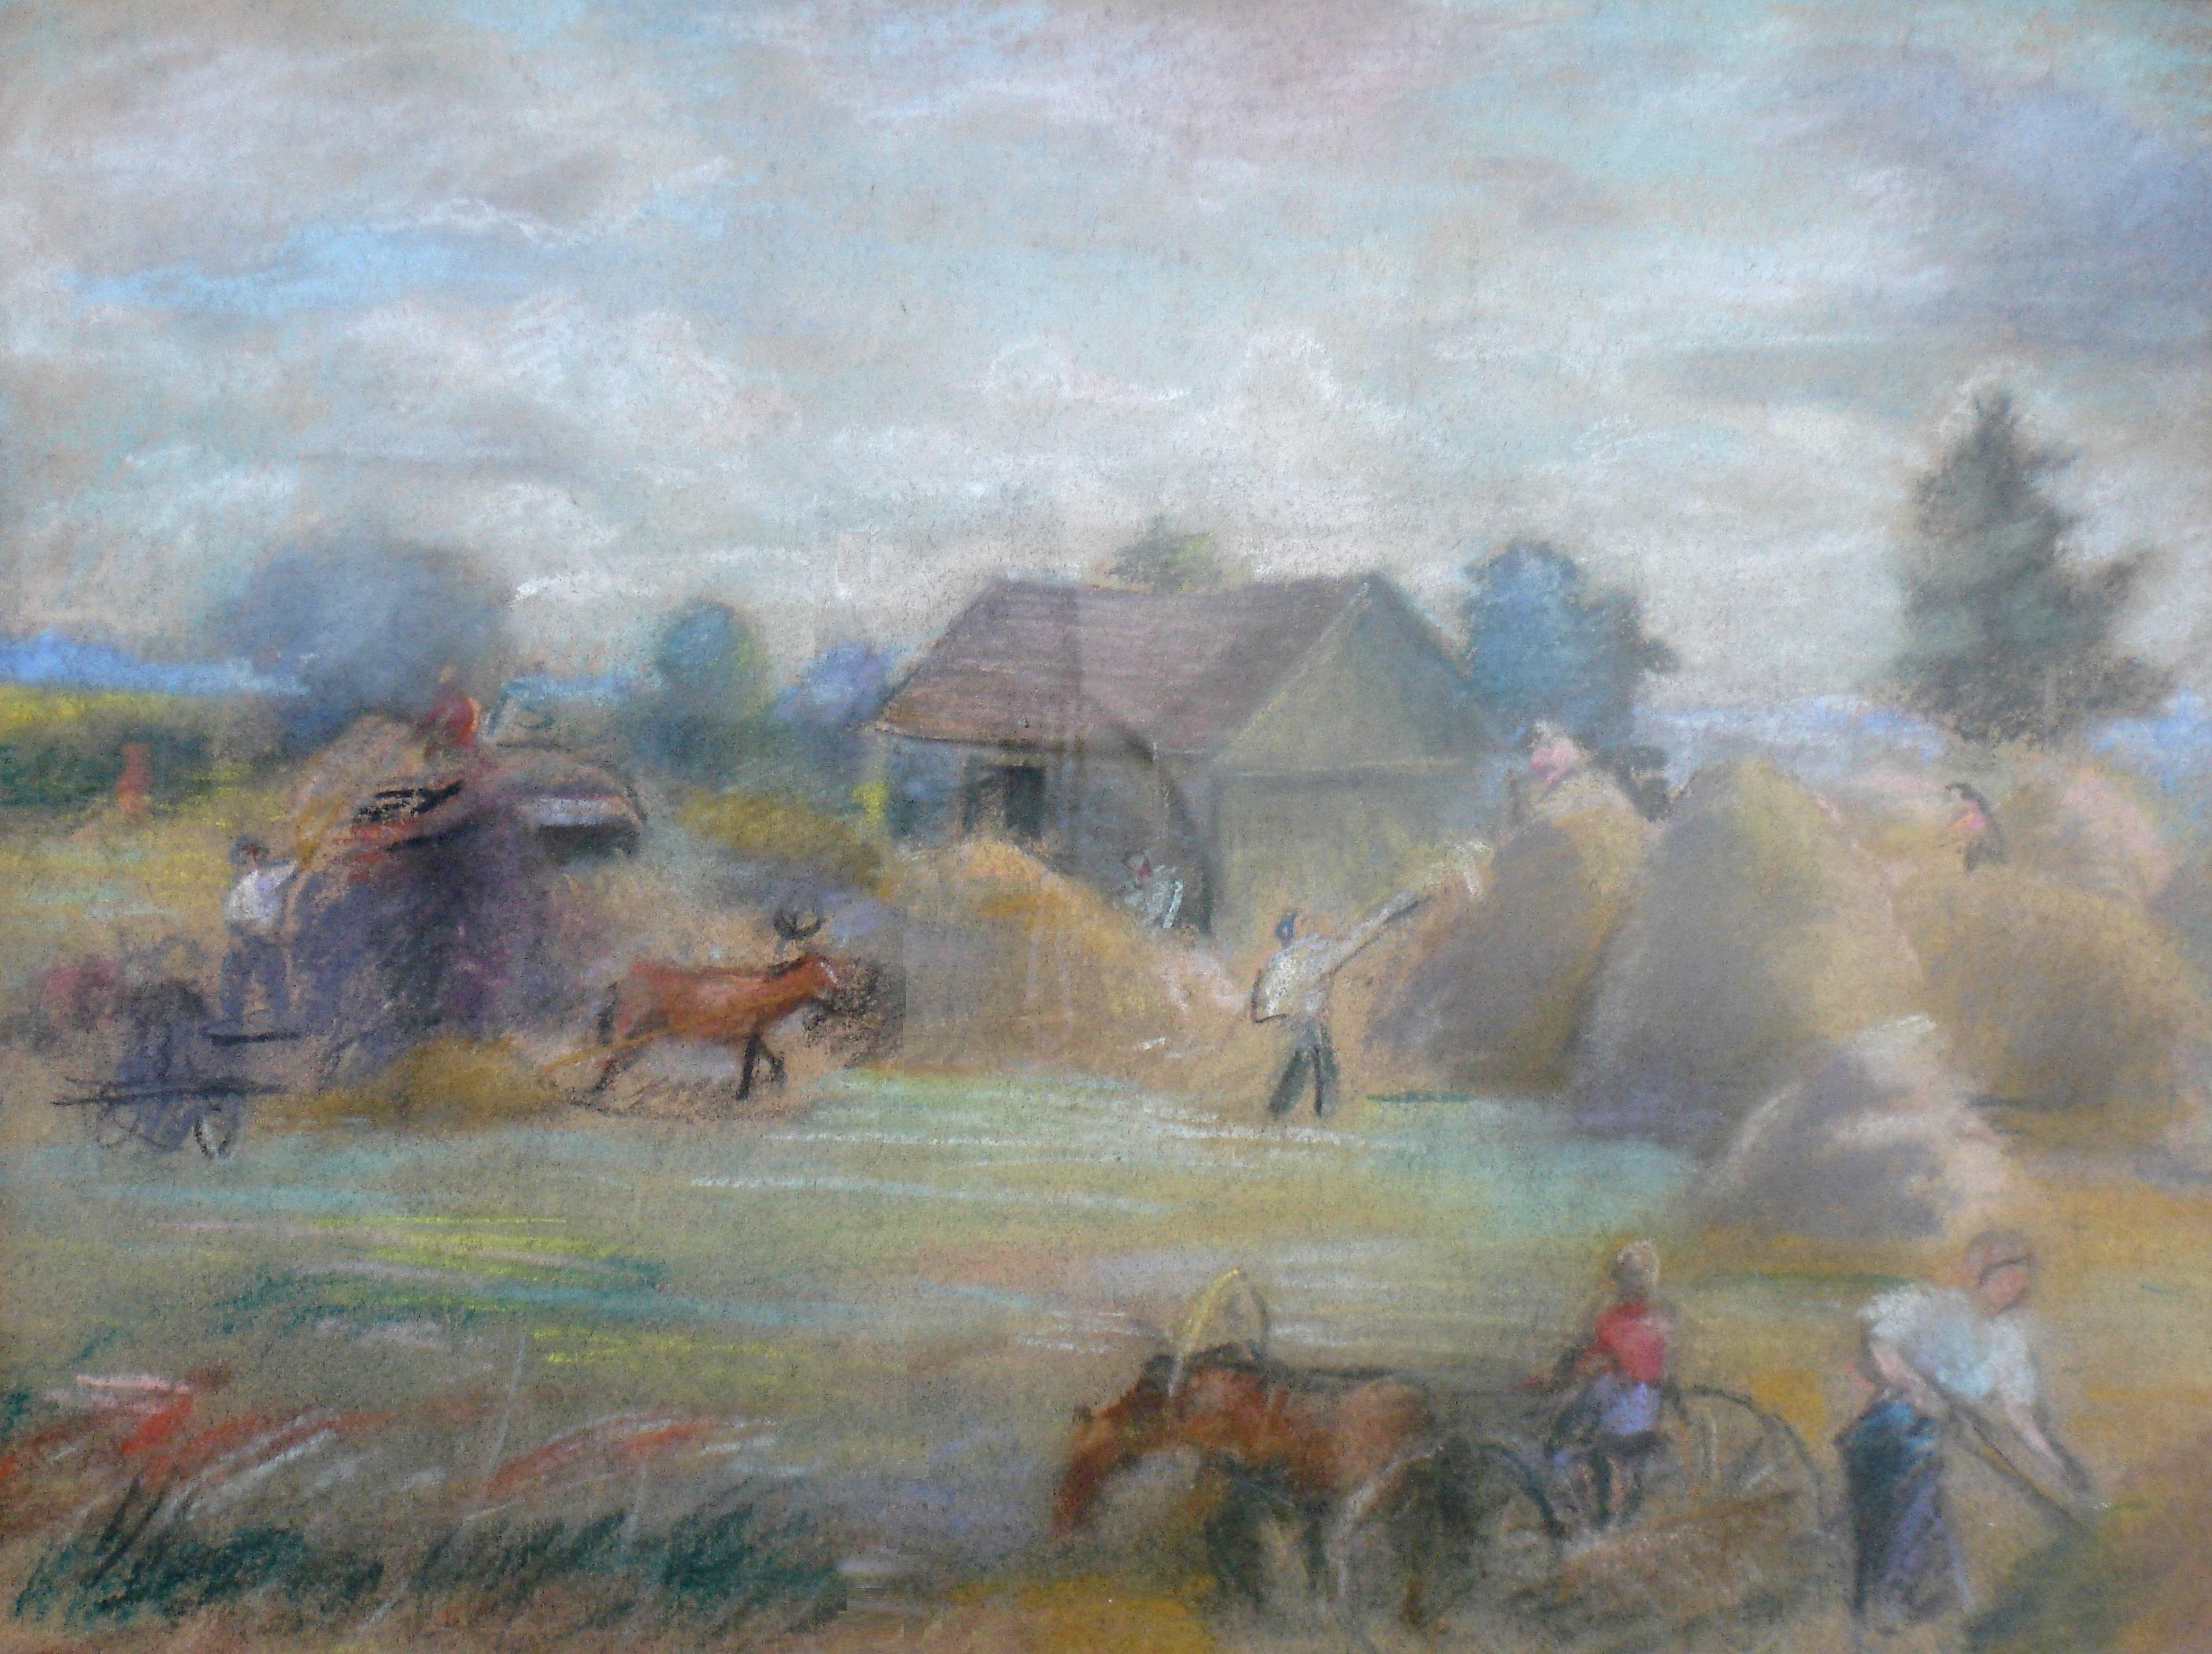 Haymaking time  1930, pastel on paper, 30x39 cm